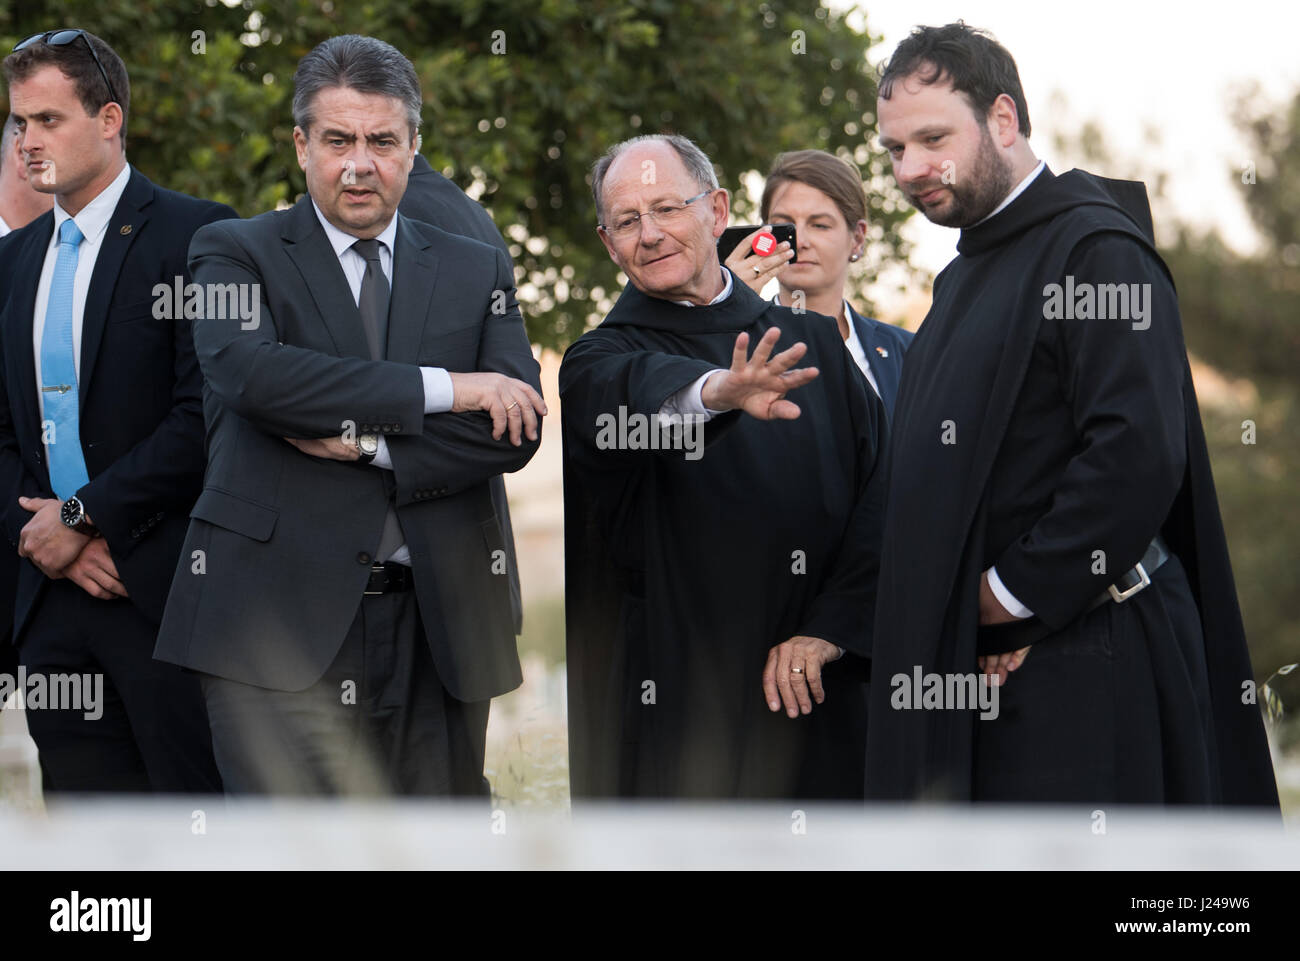 Jerusalem, Israel. 24th Apr, 2017. dpatop - German foreign minister Sigmar Gabriel (SPD) with Nikodemus Schnabel (R), the Abbey of the Dormition's administrator, and Father Elias (C) at the grave of Oskar Schindler (1908-1974) in Jerusalem, Israel, 24 April 2017. Gabriel is currently conducting a short visit to the Middle East. He will visit Israel, Jordan and the autonomous Palestinian territories today and tomorrow. Photo: Bernd von Jutrczenka/dpa/Alamy Live News Stock Photo